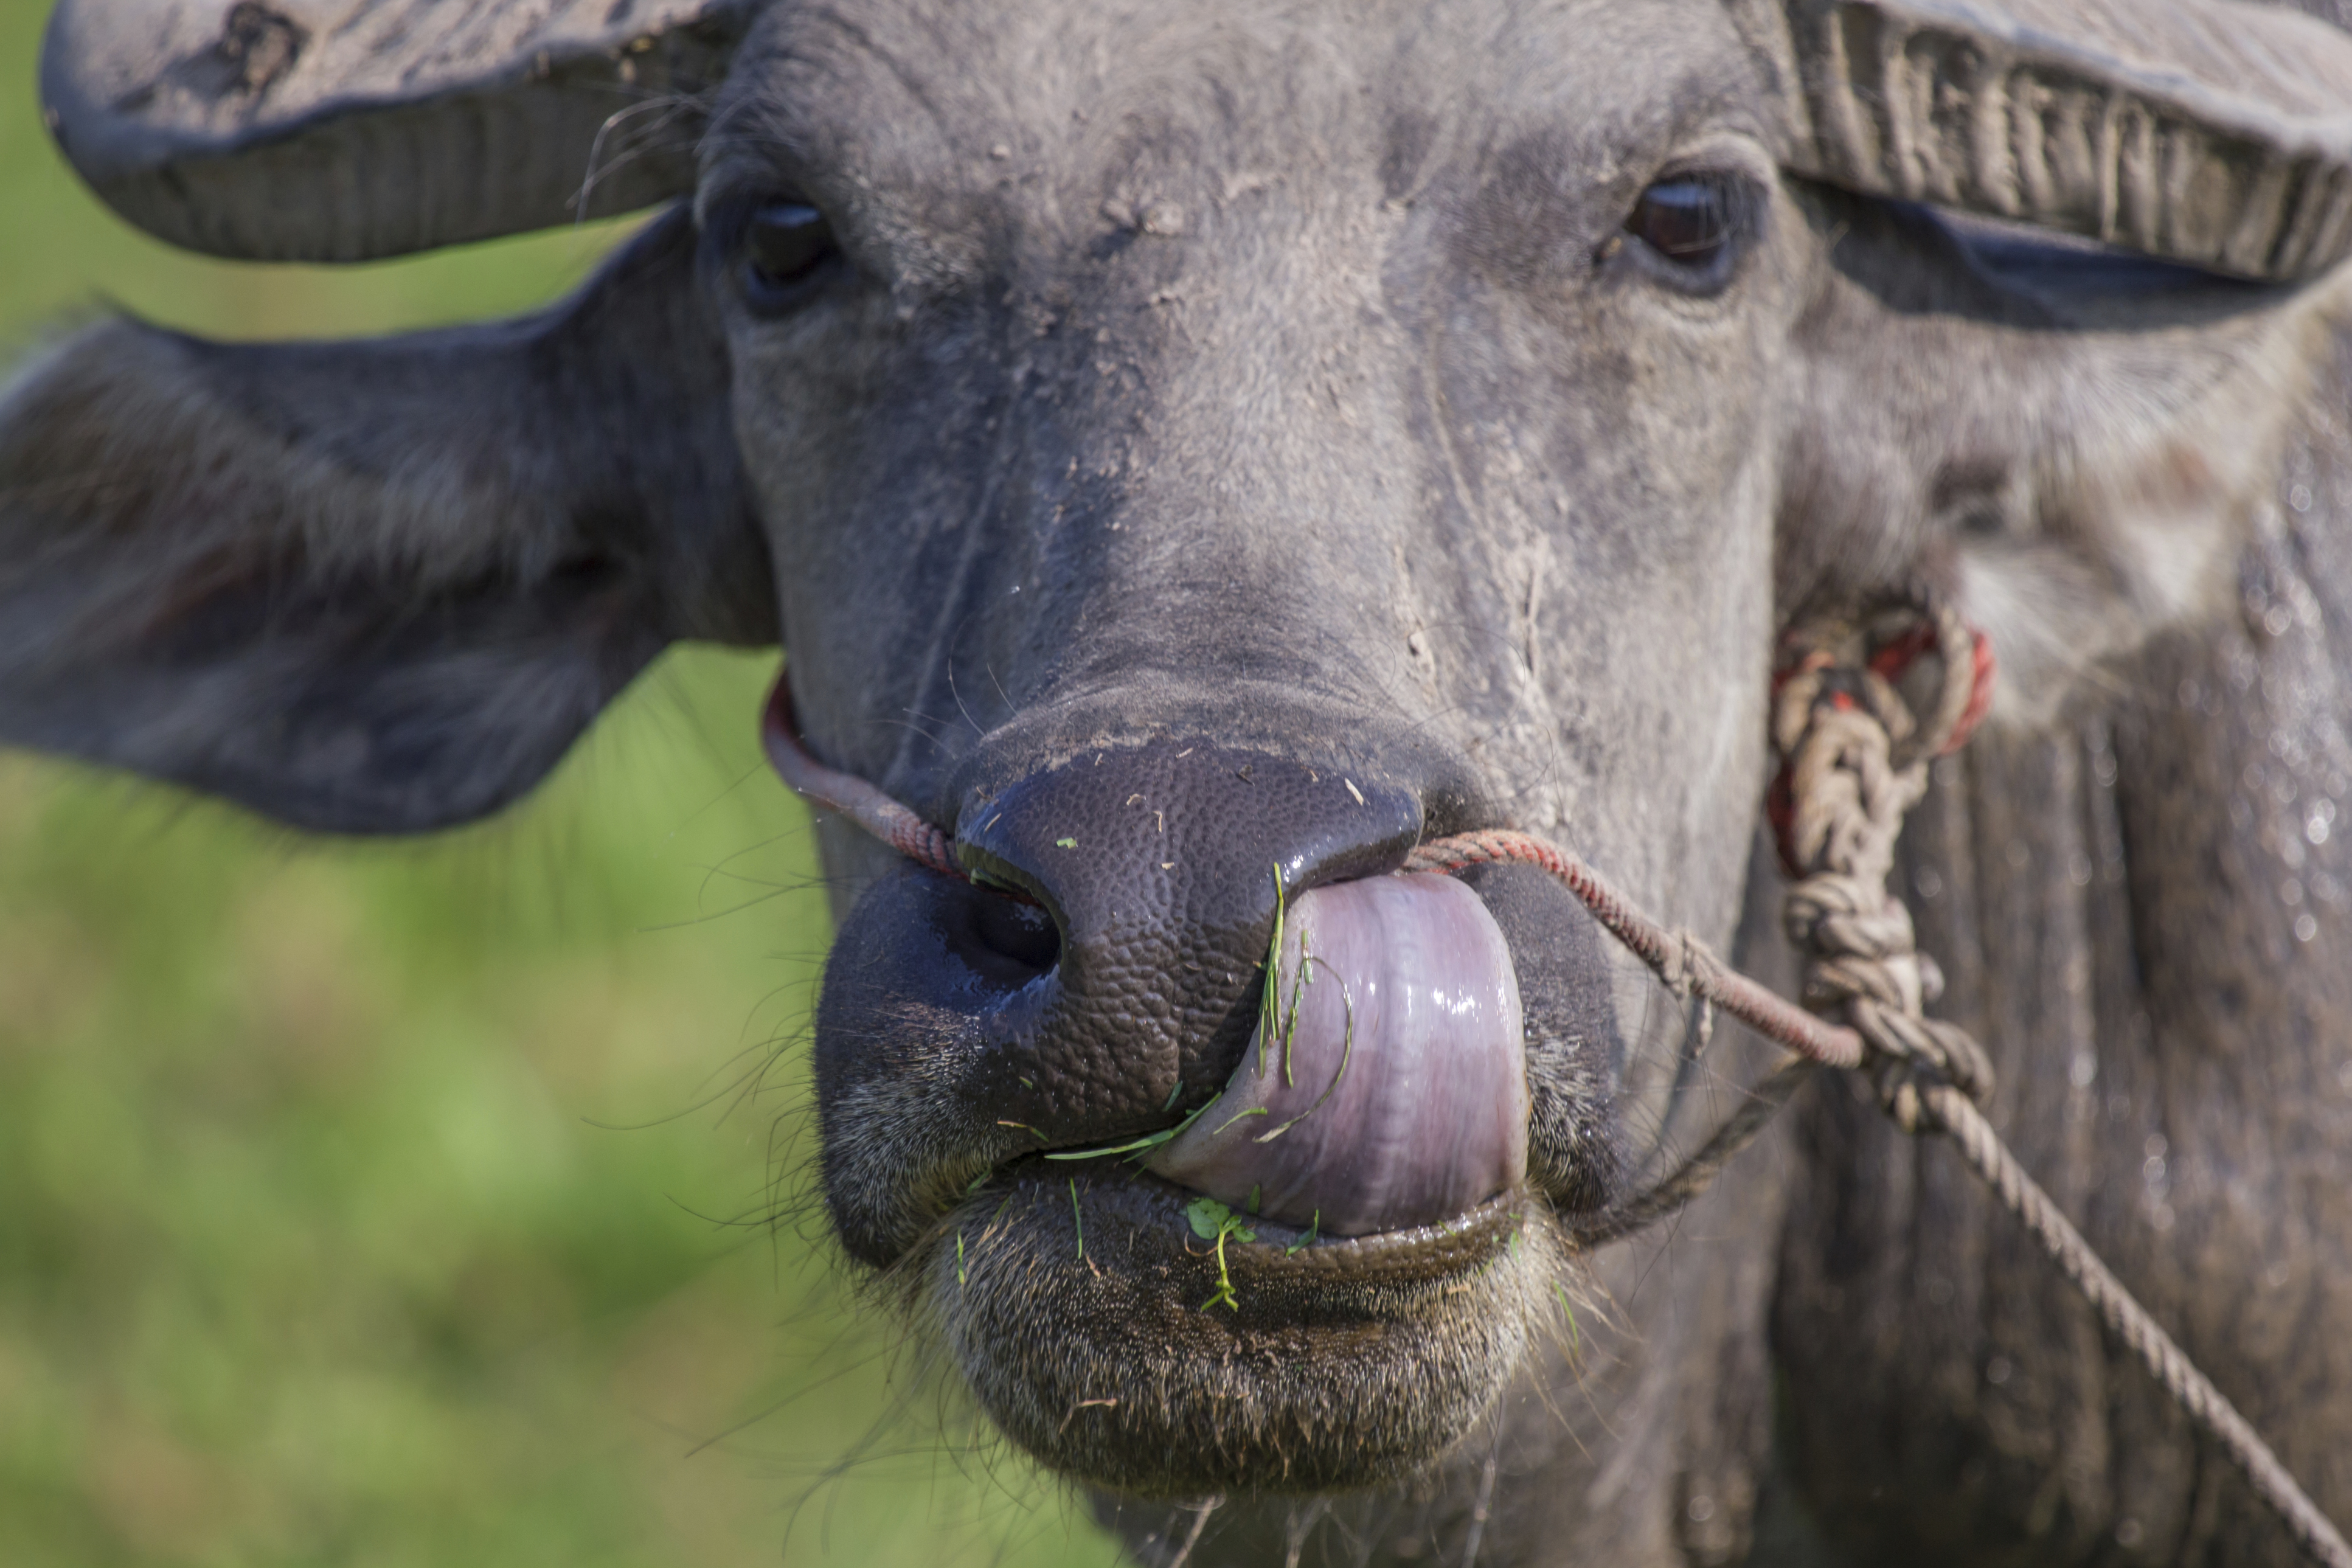 India buffalo meat exports on the rise